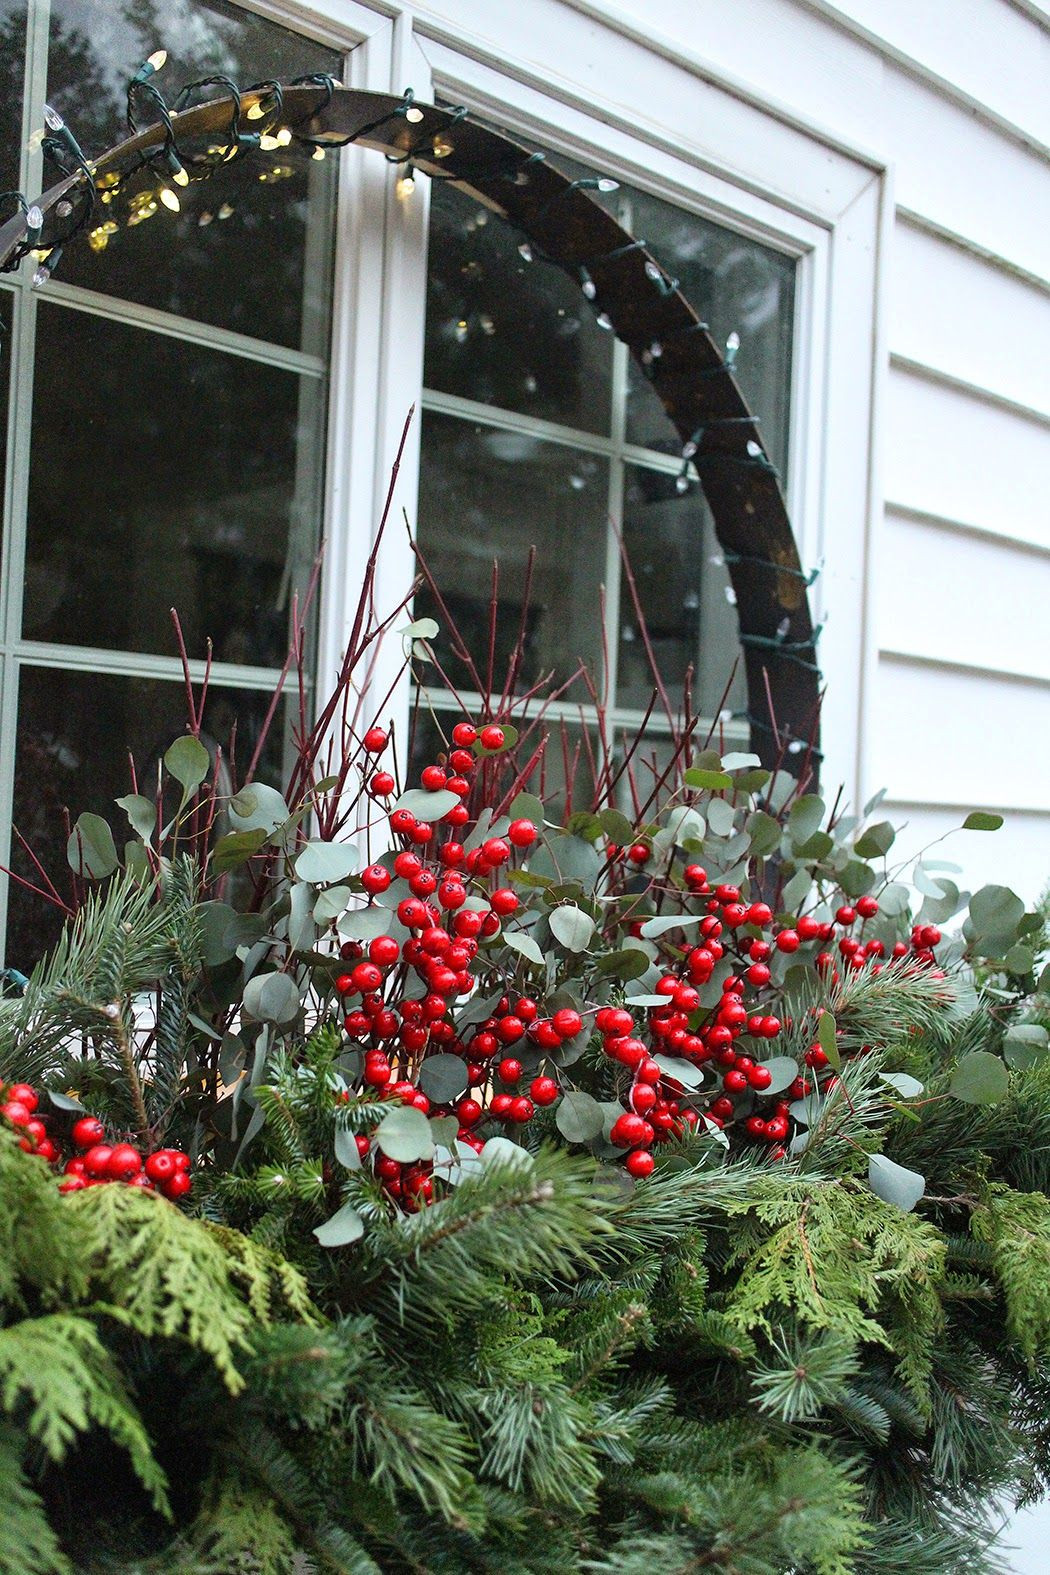 Outdoor Christmas Window Decorations
 HOLIDAY CHEER FOR OUTSIDE